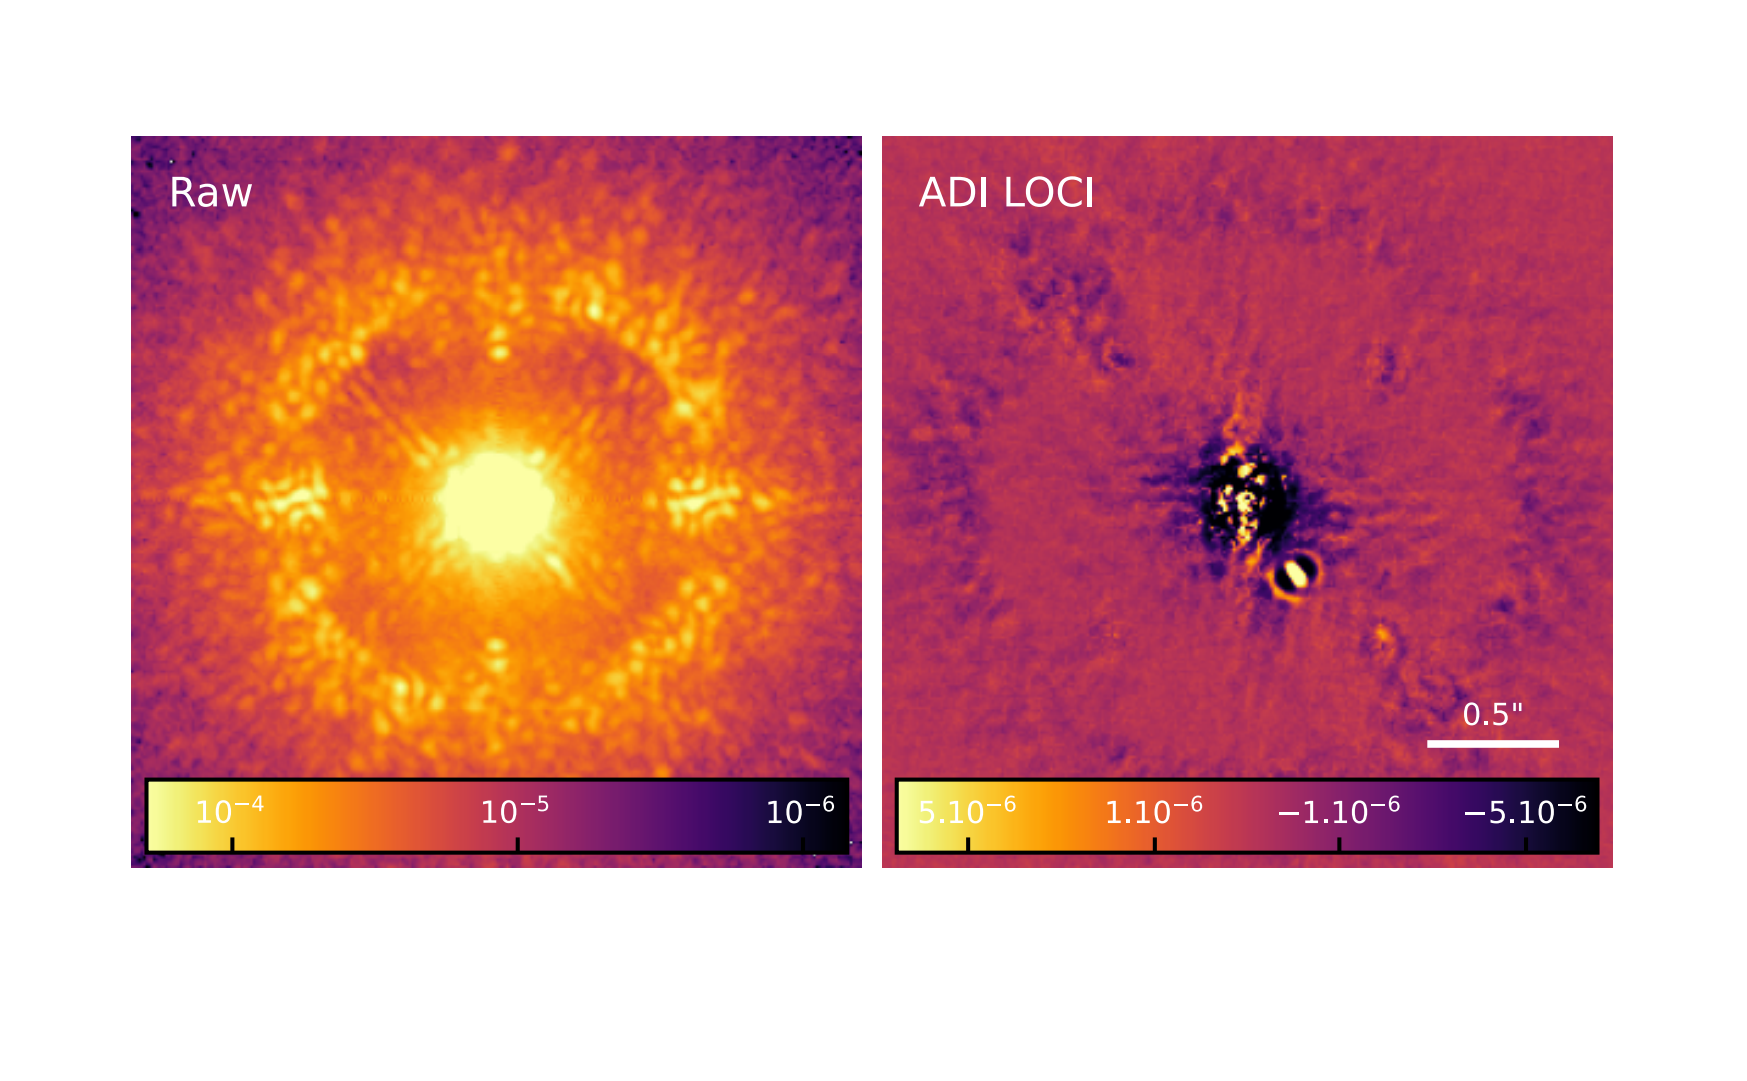 Imaging Exoplanets With Coronagraphic Instruments